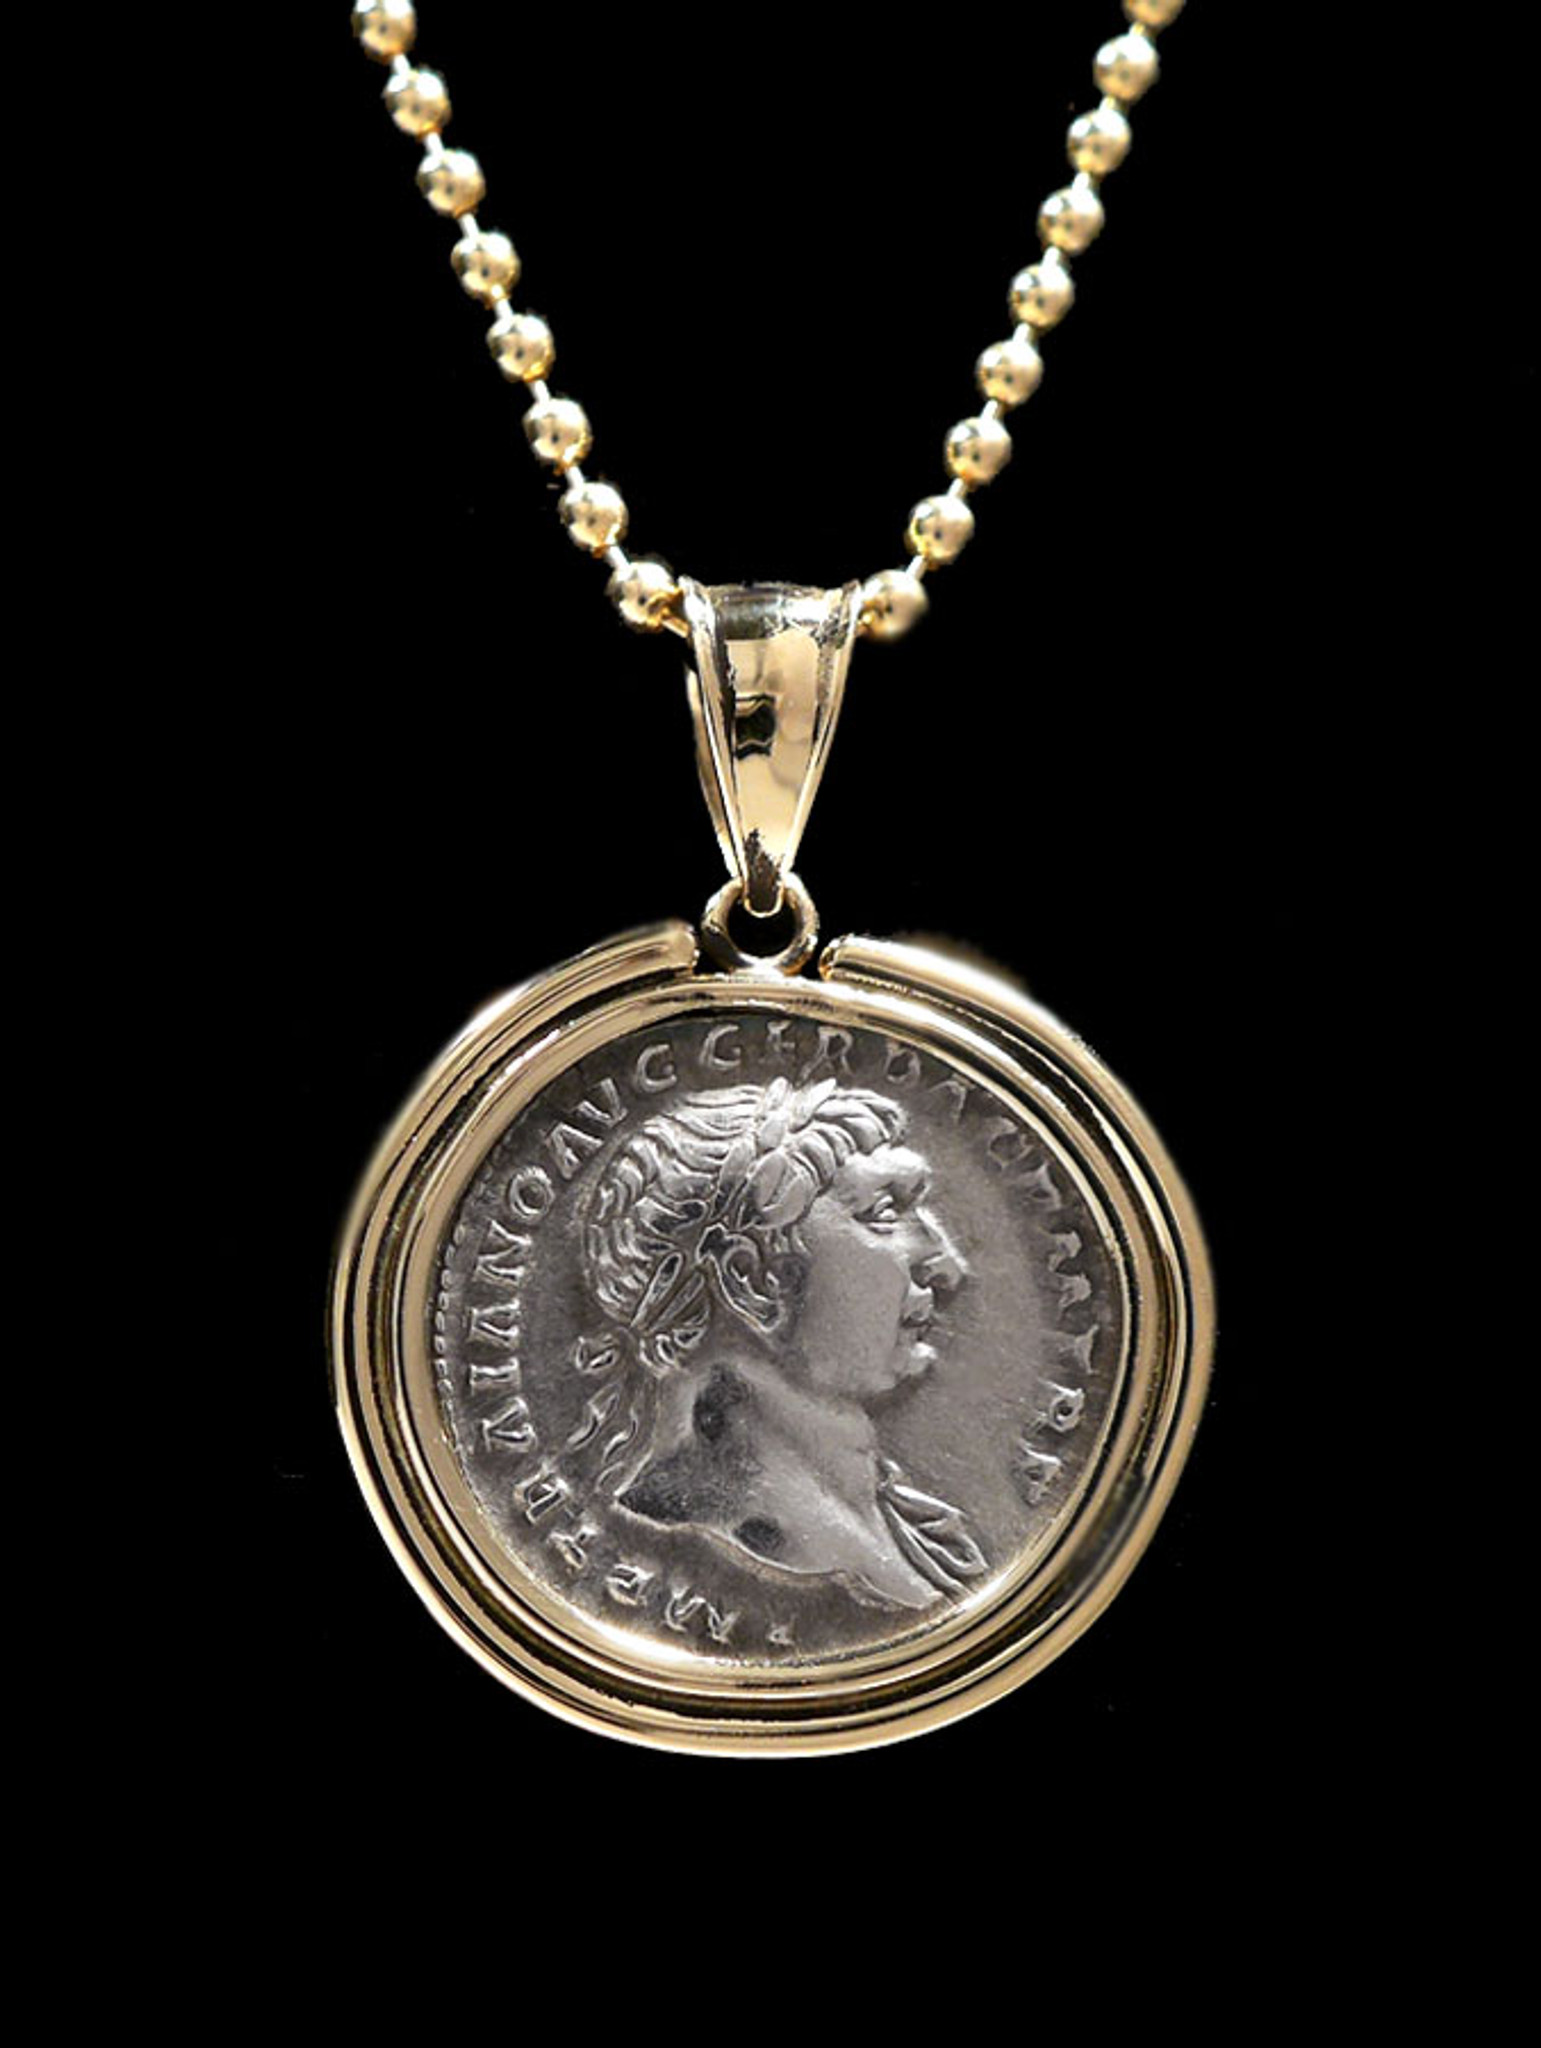 AEQUITAS JUSTICE AND EQUALITY ROMAN ANCIENT COIN PENDANT WITH EMPEROR ...